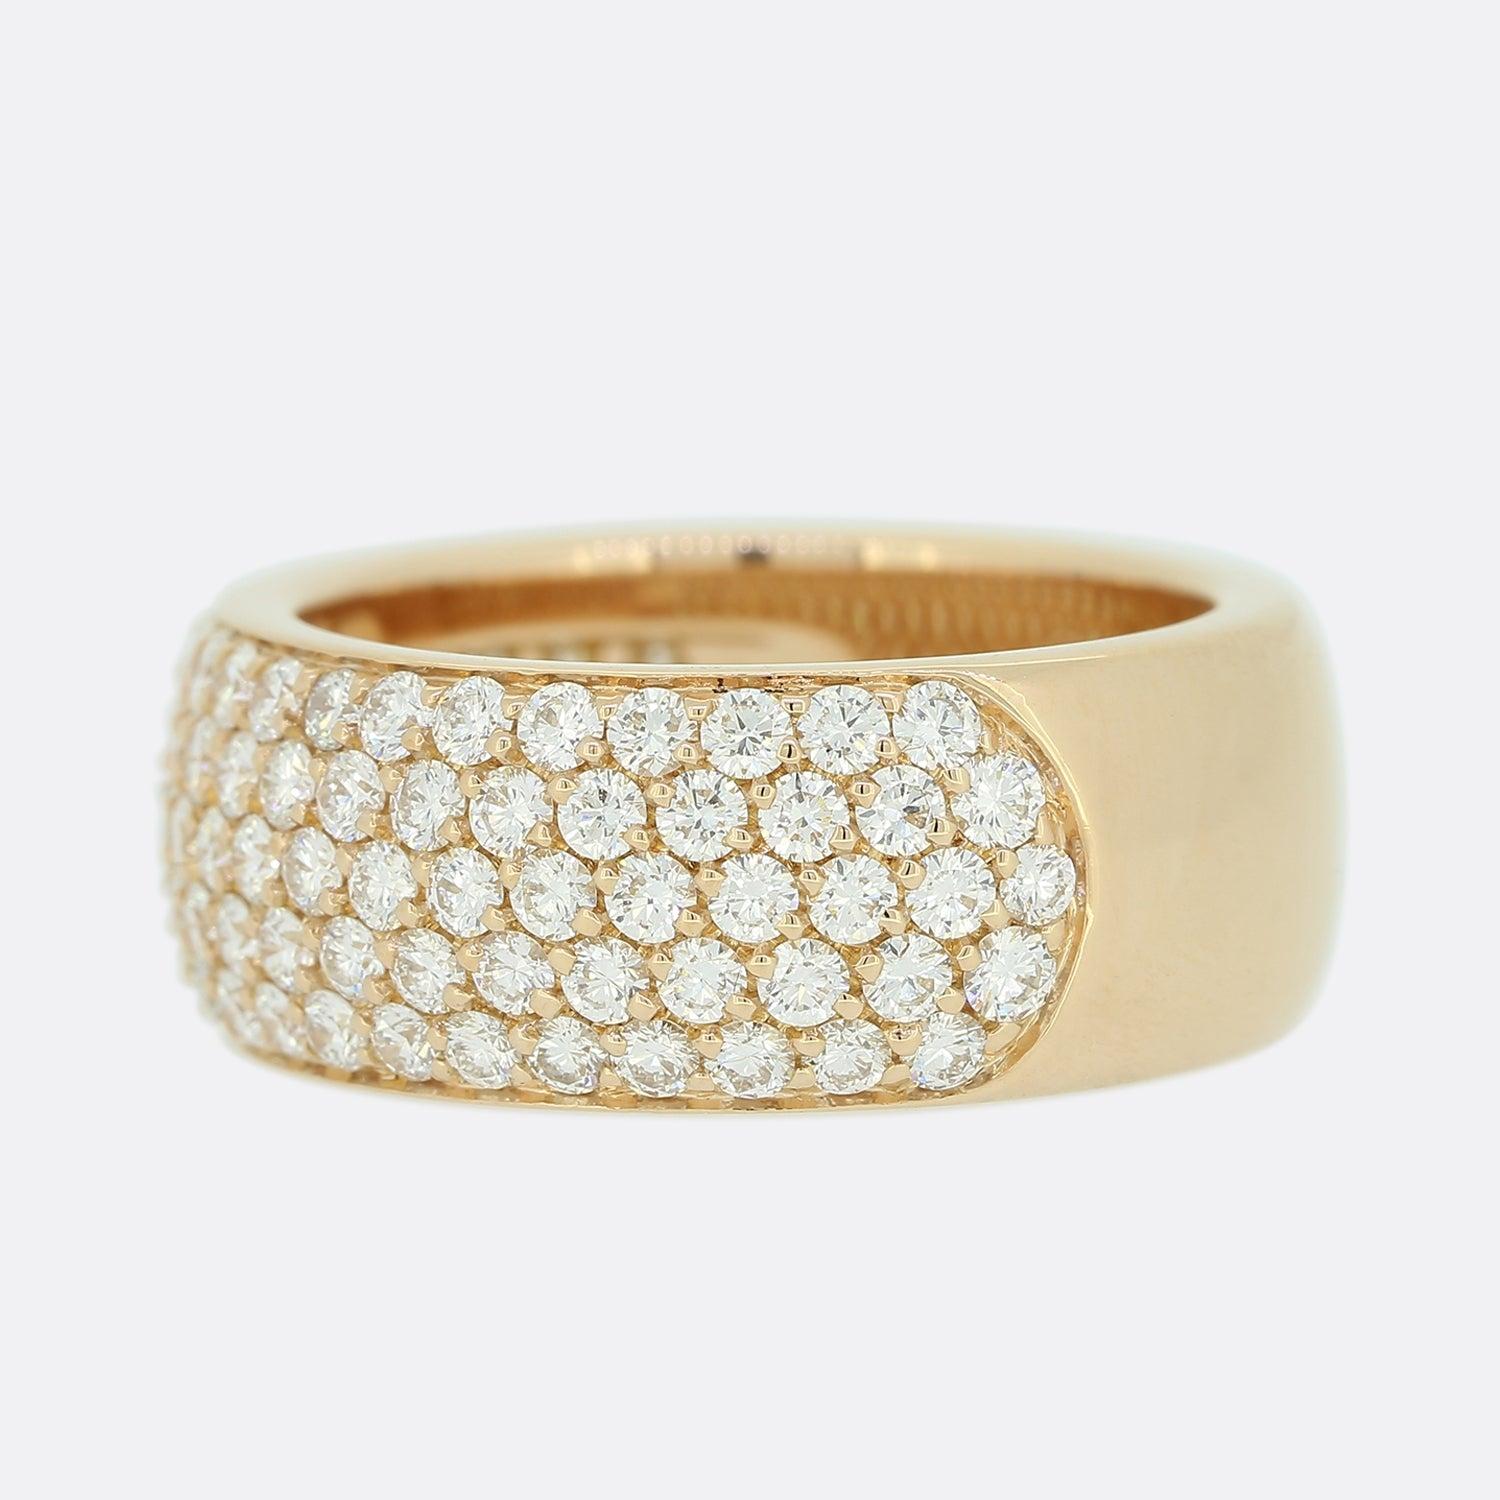 This is a wonderful 18ct rose gold, pave set diamond band ring from the luxury jewellery designer Cartier. The ring features 2.0 carats of sparkling round brilliant cut diamonds which are pave set over half of the band. As you would expect from